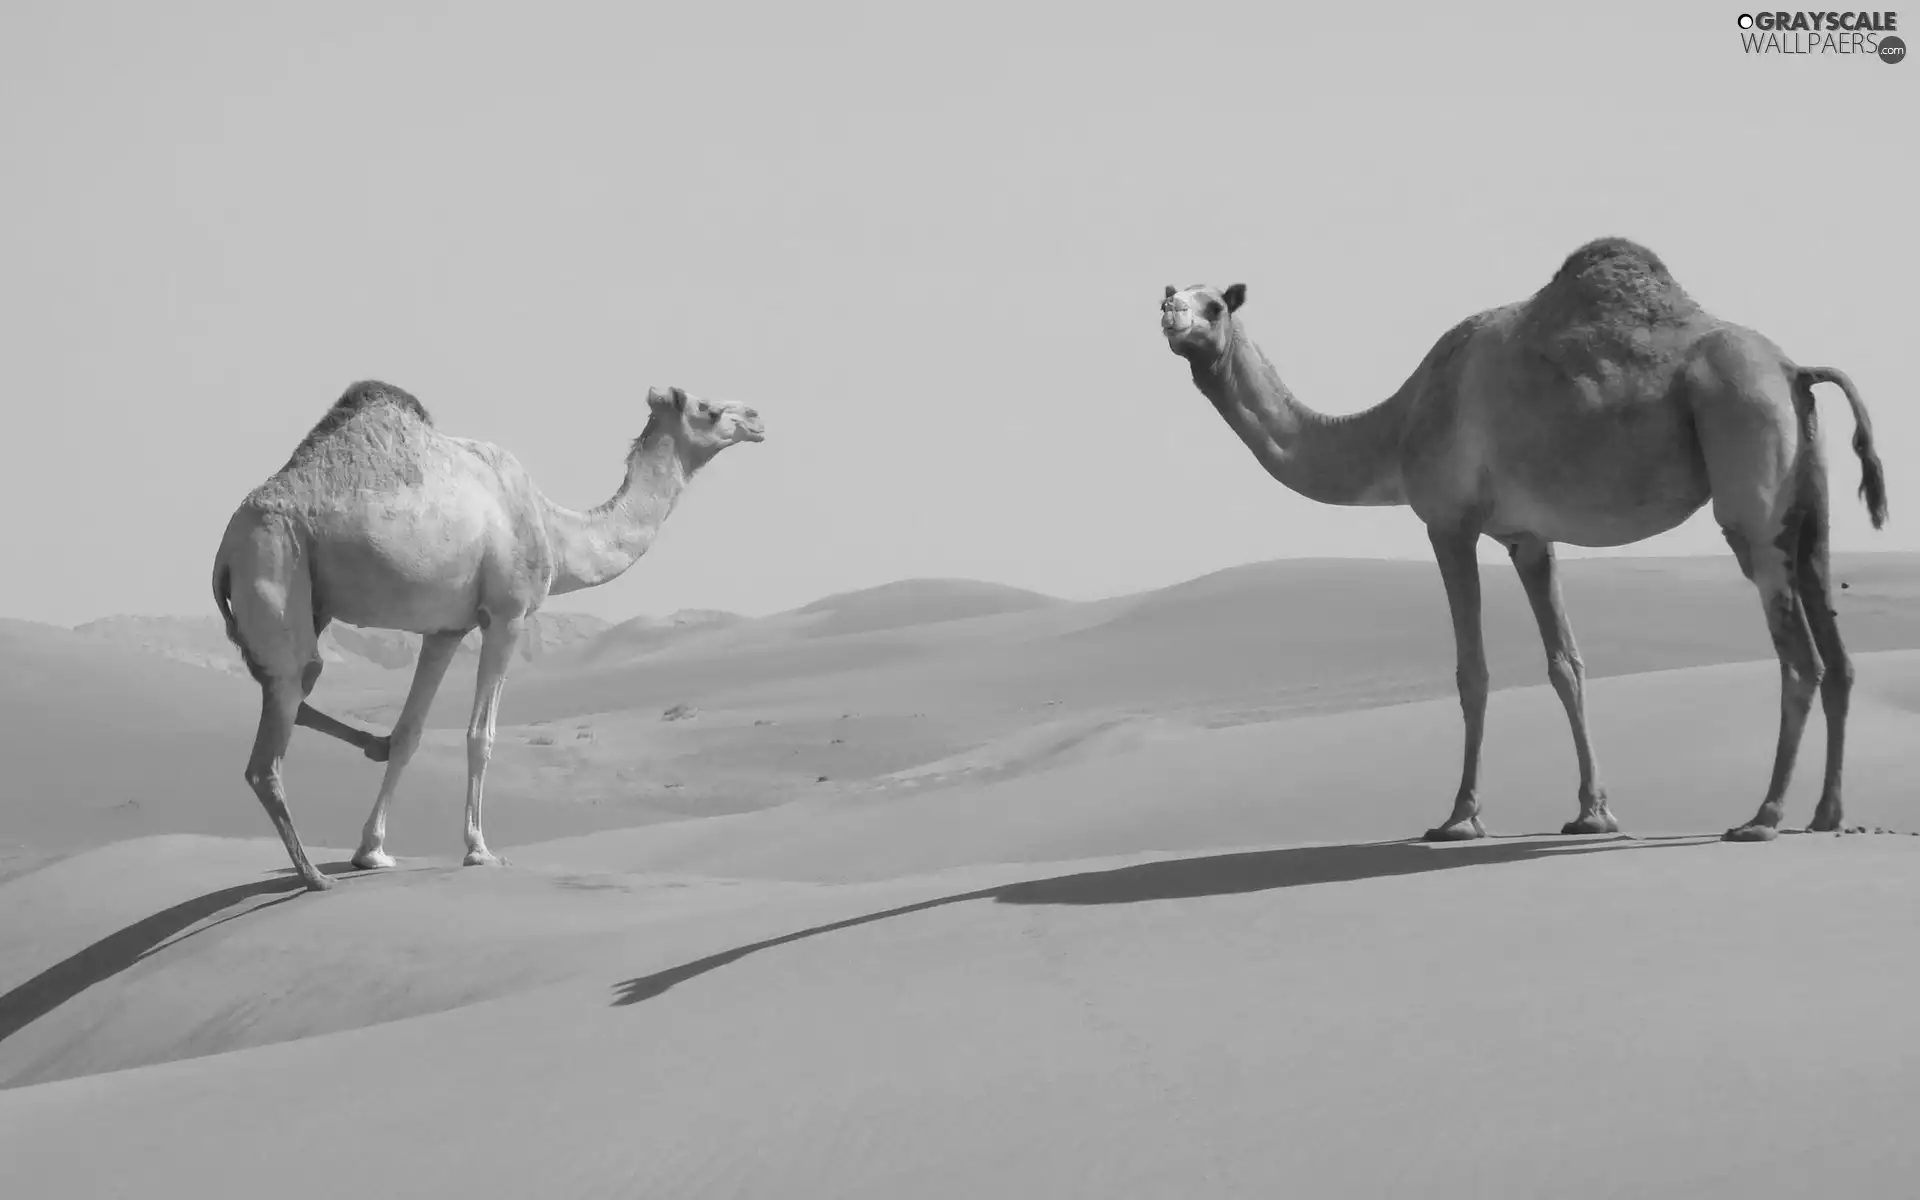 Desert, Two cars, Camels